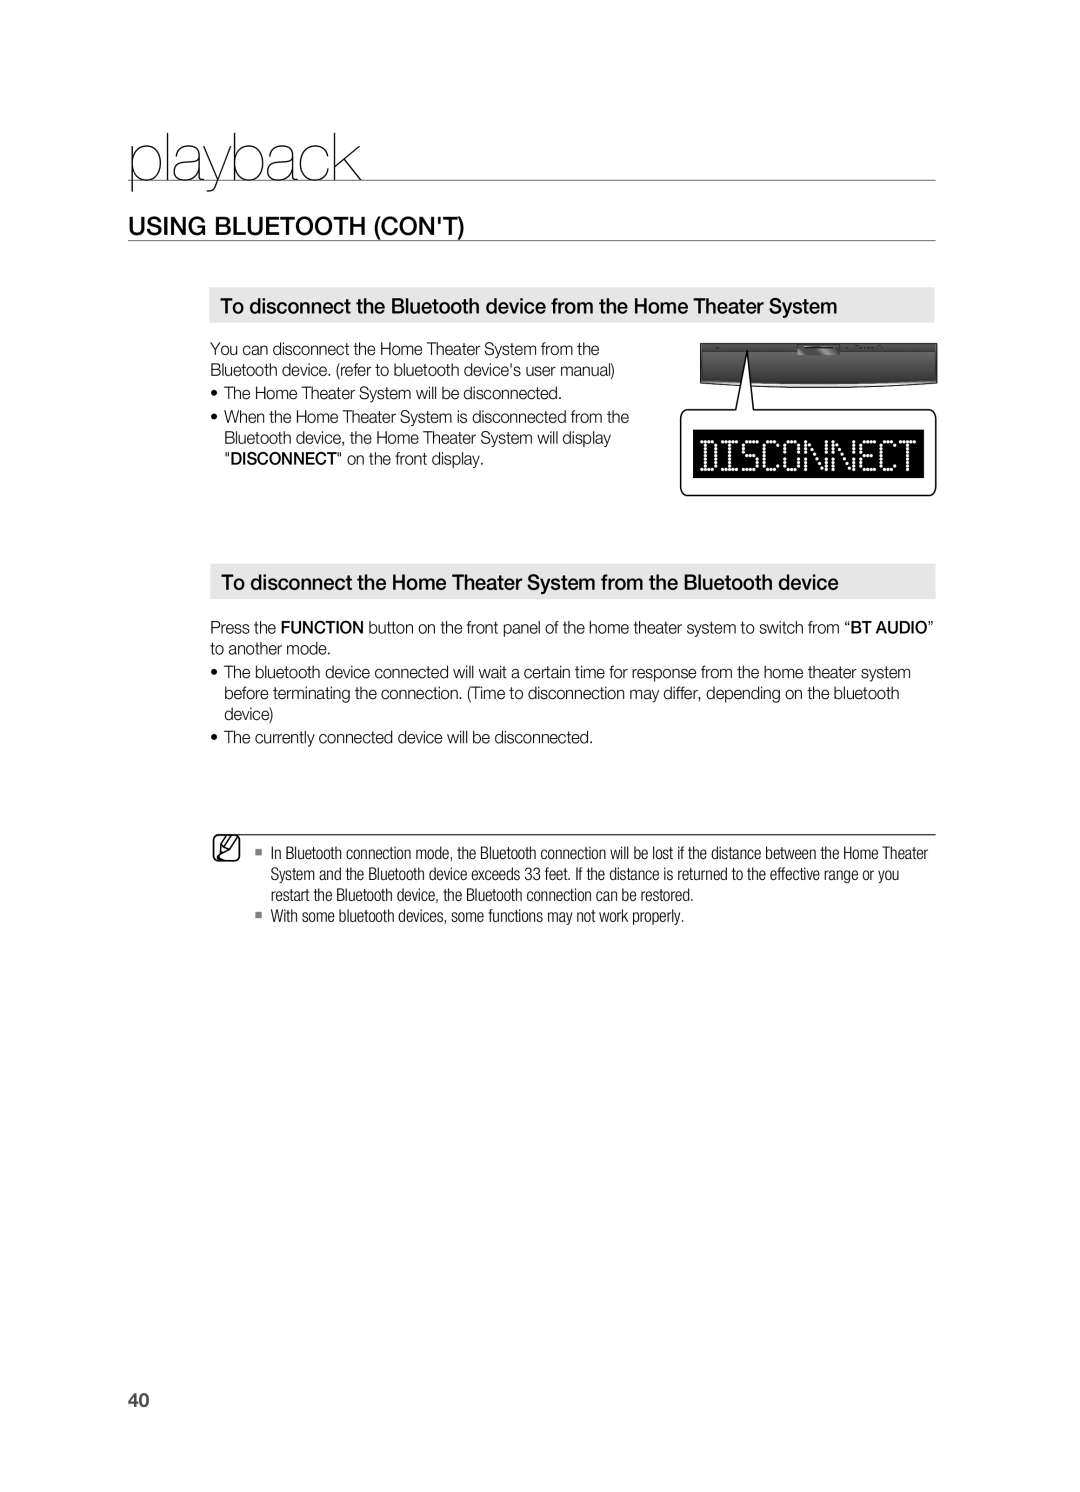 Sony HT-X810 user manual USING BLUETOOTH cont, To disconnect the Bluetooth device from the Home Theater System, playback 